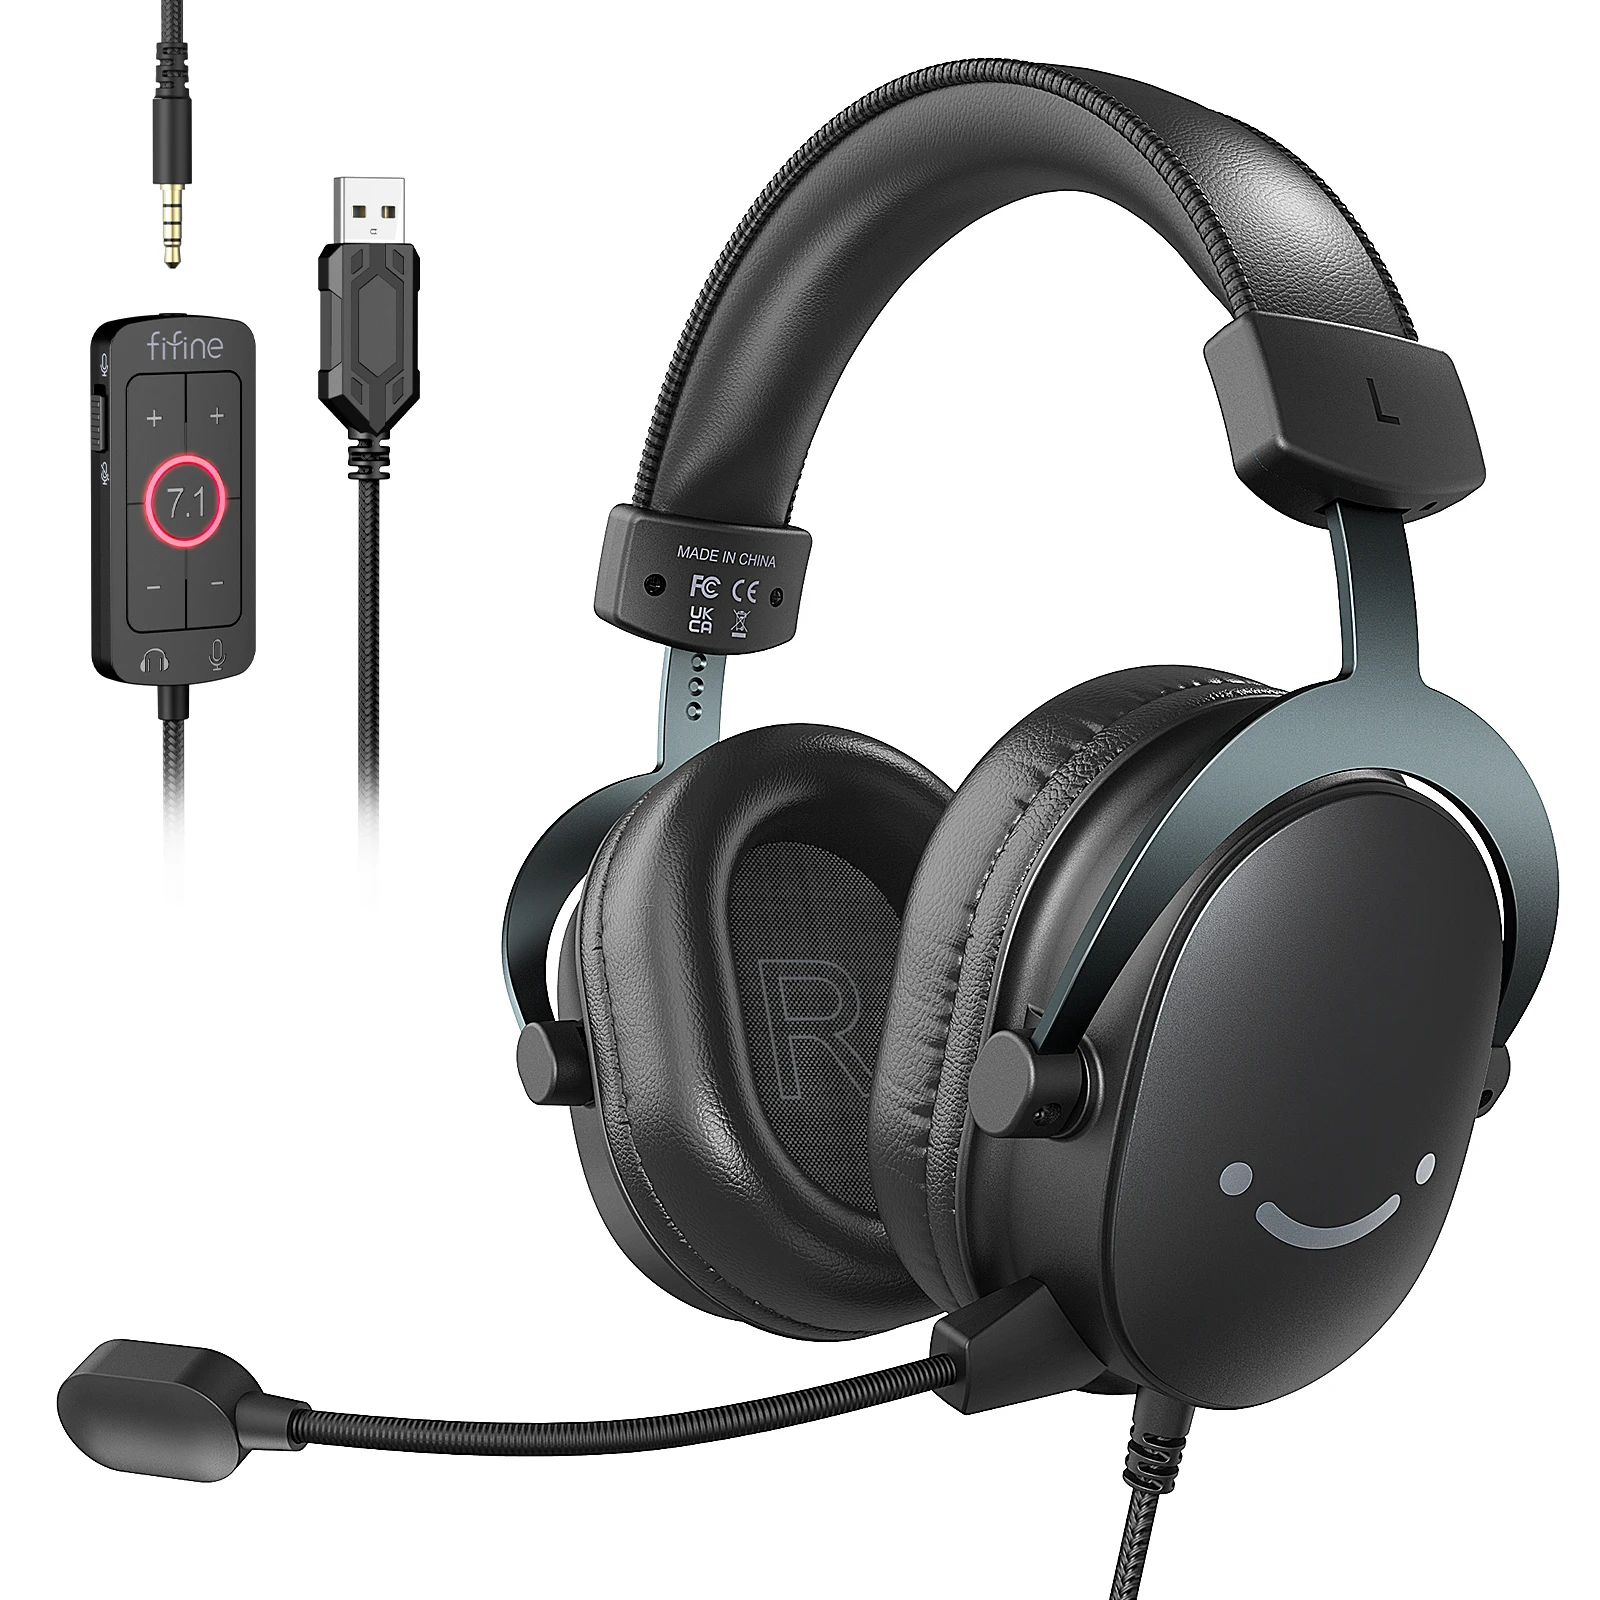 FIFINE Headset,3.5 mm jack&USB Headphone with 7.1 Surround